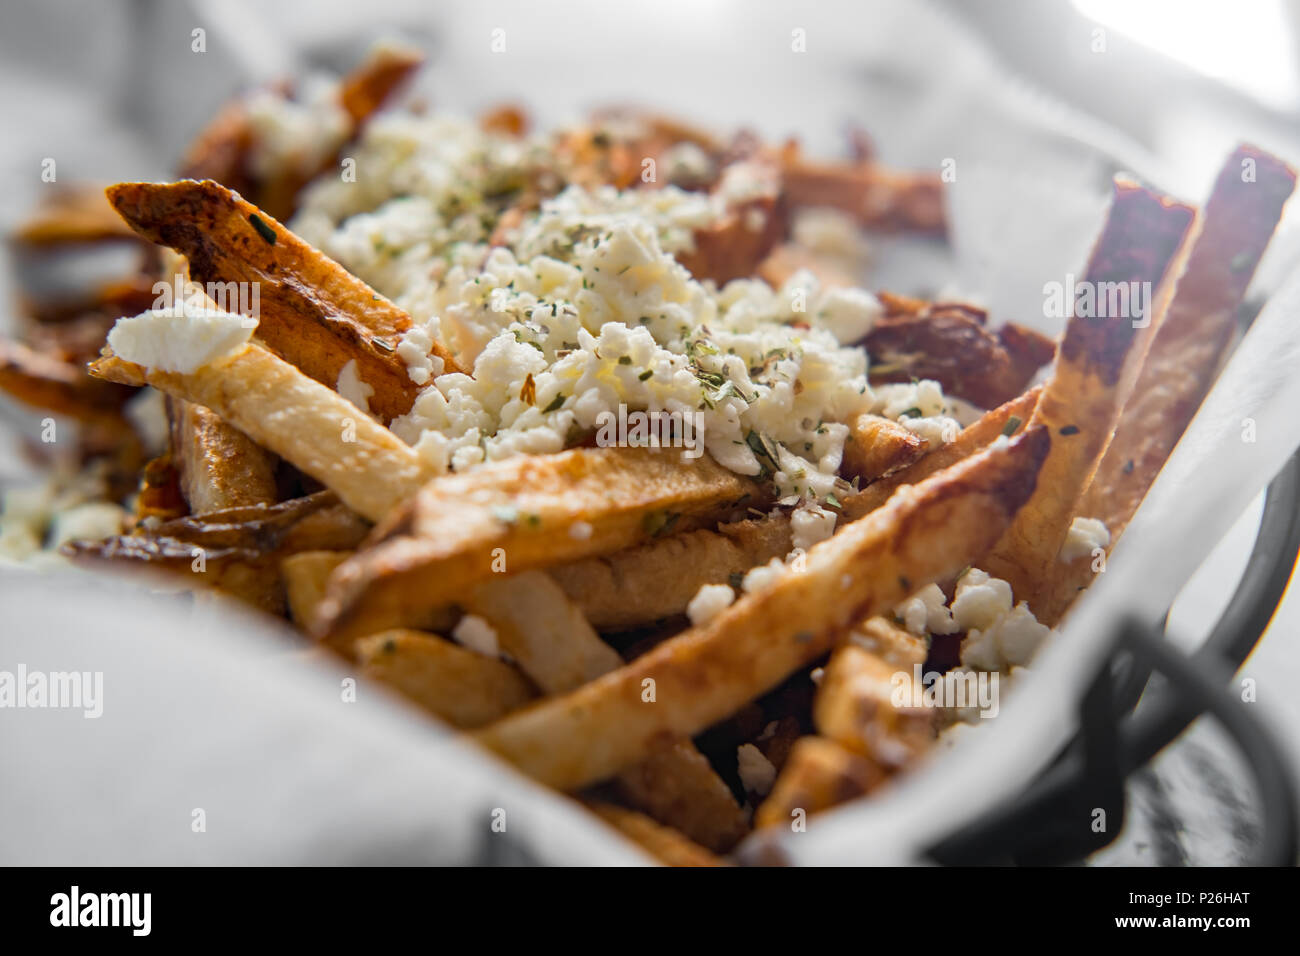 Delicious Mediterranean street cart fried potatoes with feta cheese herbs and spices Stock Photo